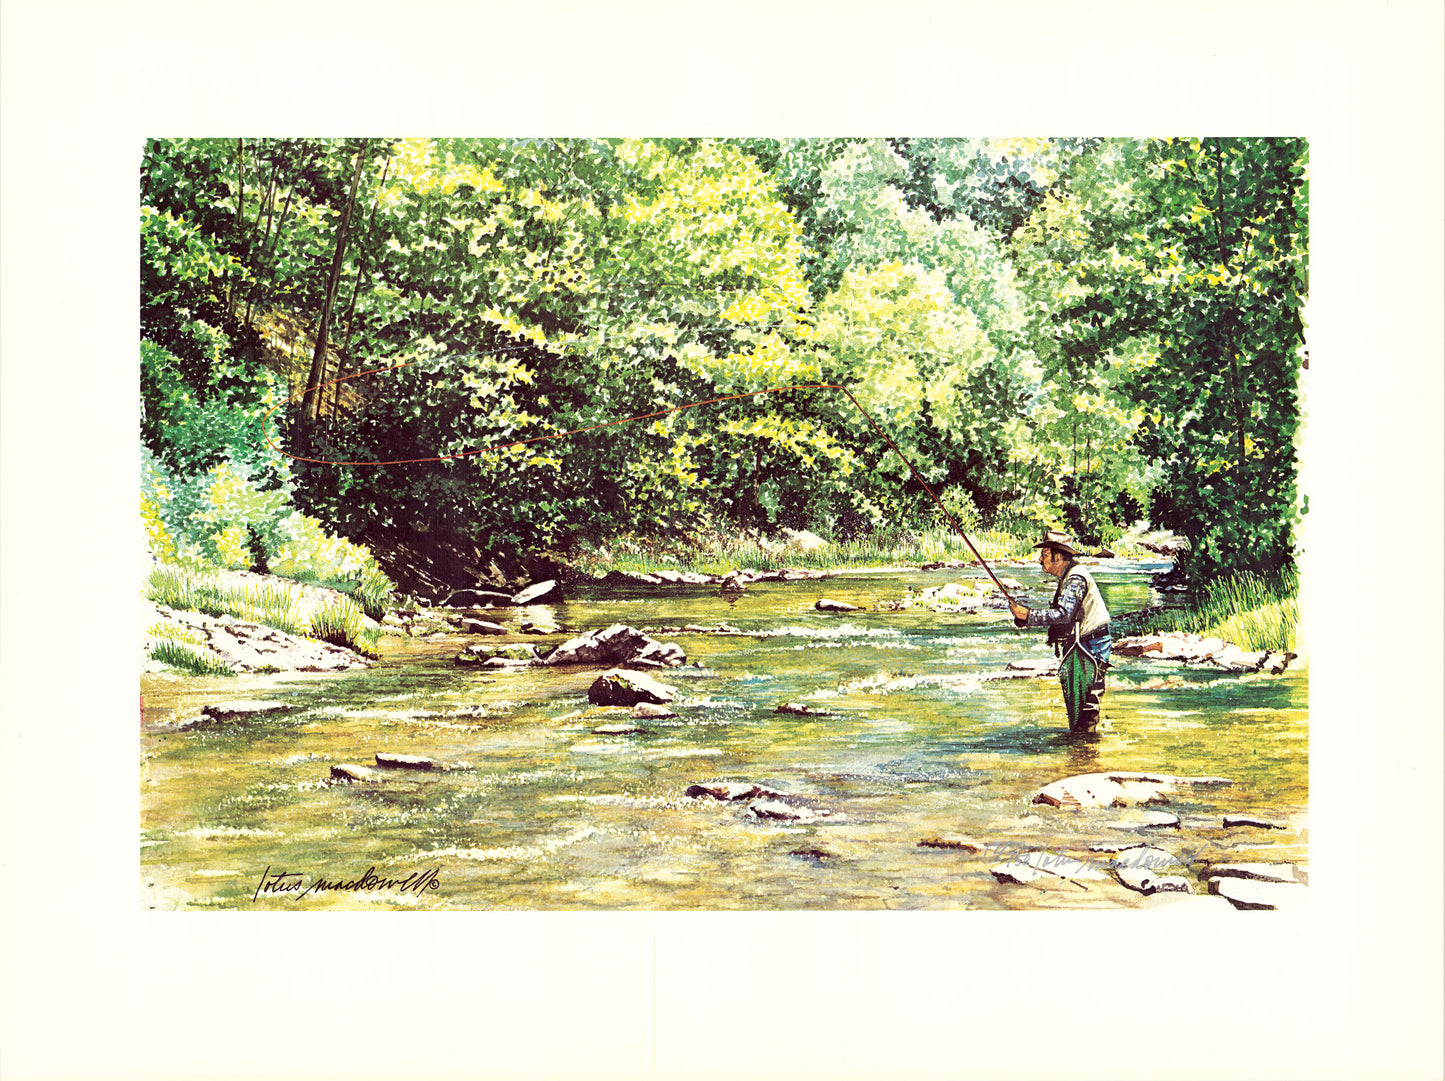 Afternoon at Thorn Creek, Franklin, WV- Limited Edition Print by Lotus MacDowell, Artworks WV: Here's a great outdoor subject: fly fishing in a stream in Franklin, WV. Every outdoor enthusiast will be hinting that they want this for their home or office. Introducing the Limited-Edition Print version of this powerful watercolor painting titled "Afternoon at Thorn Creek" by Lotus MacDowell. The sun beats down on this pristine stream, as a fly fisherman casts his line, waiting for some trout. 